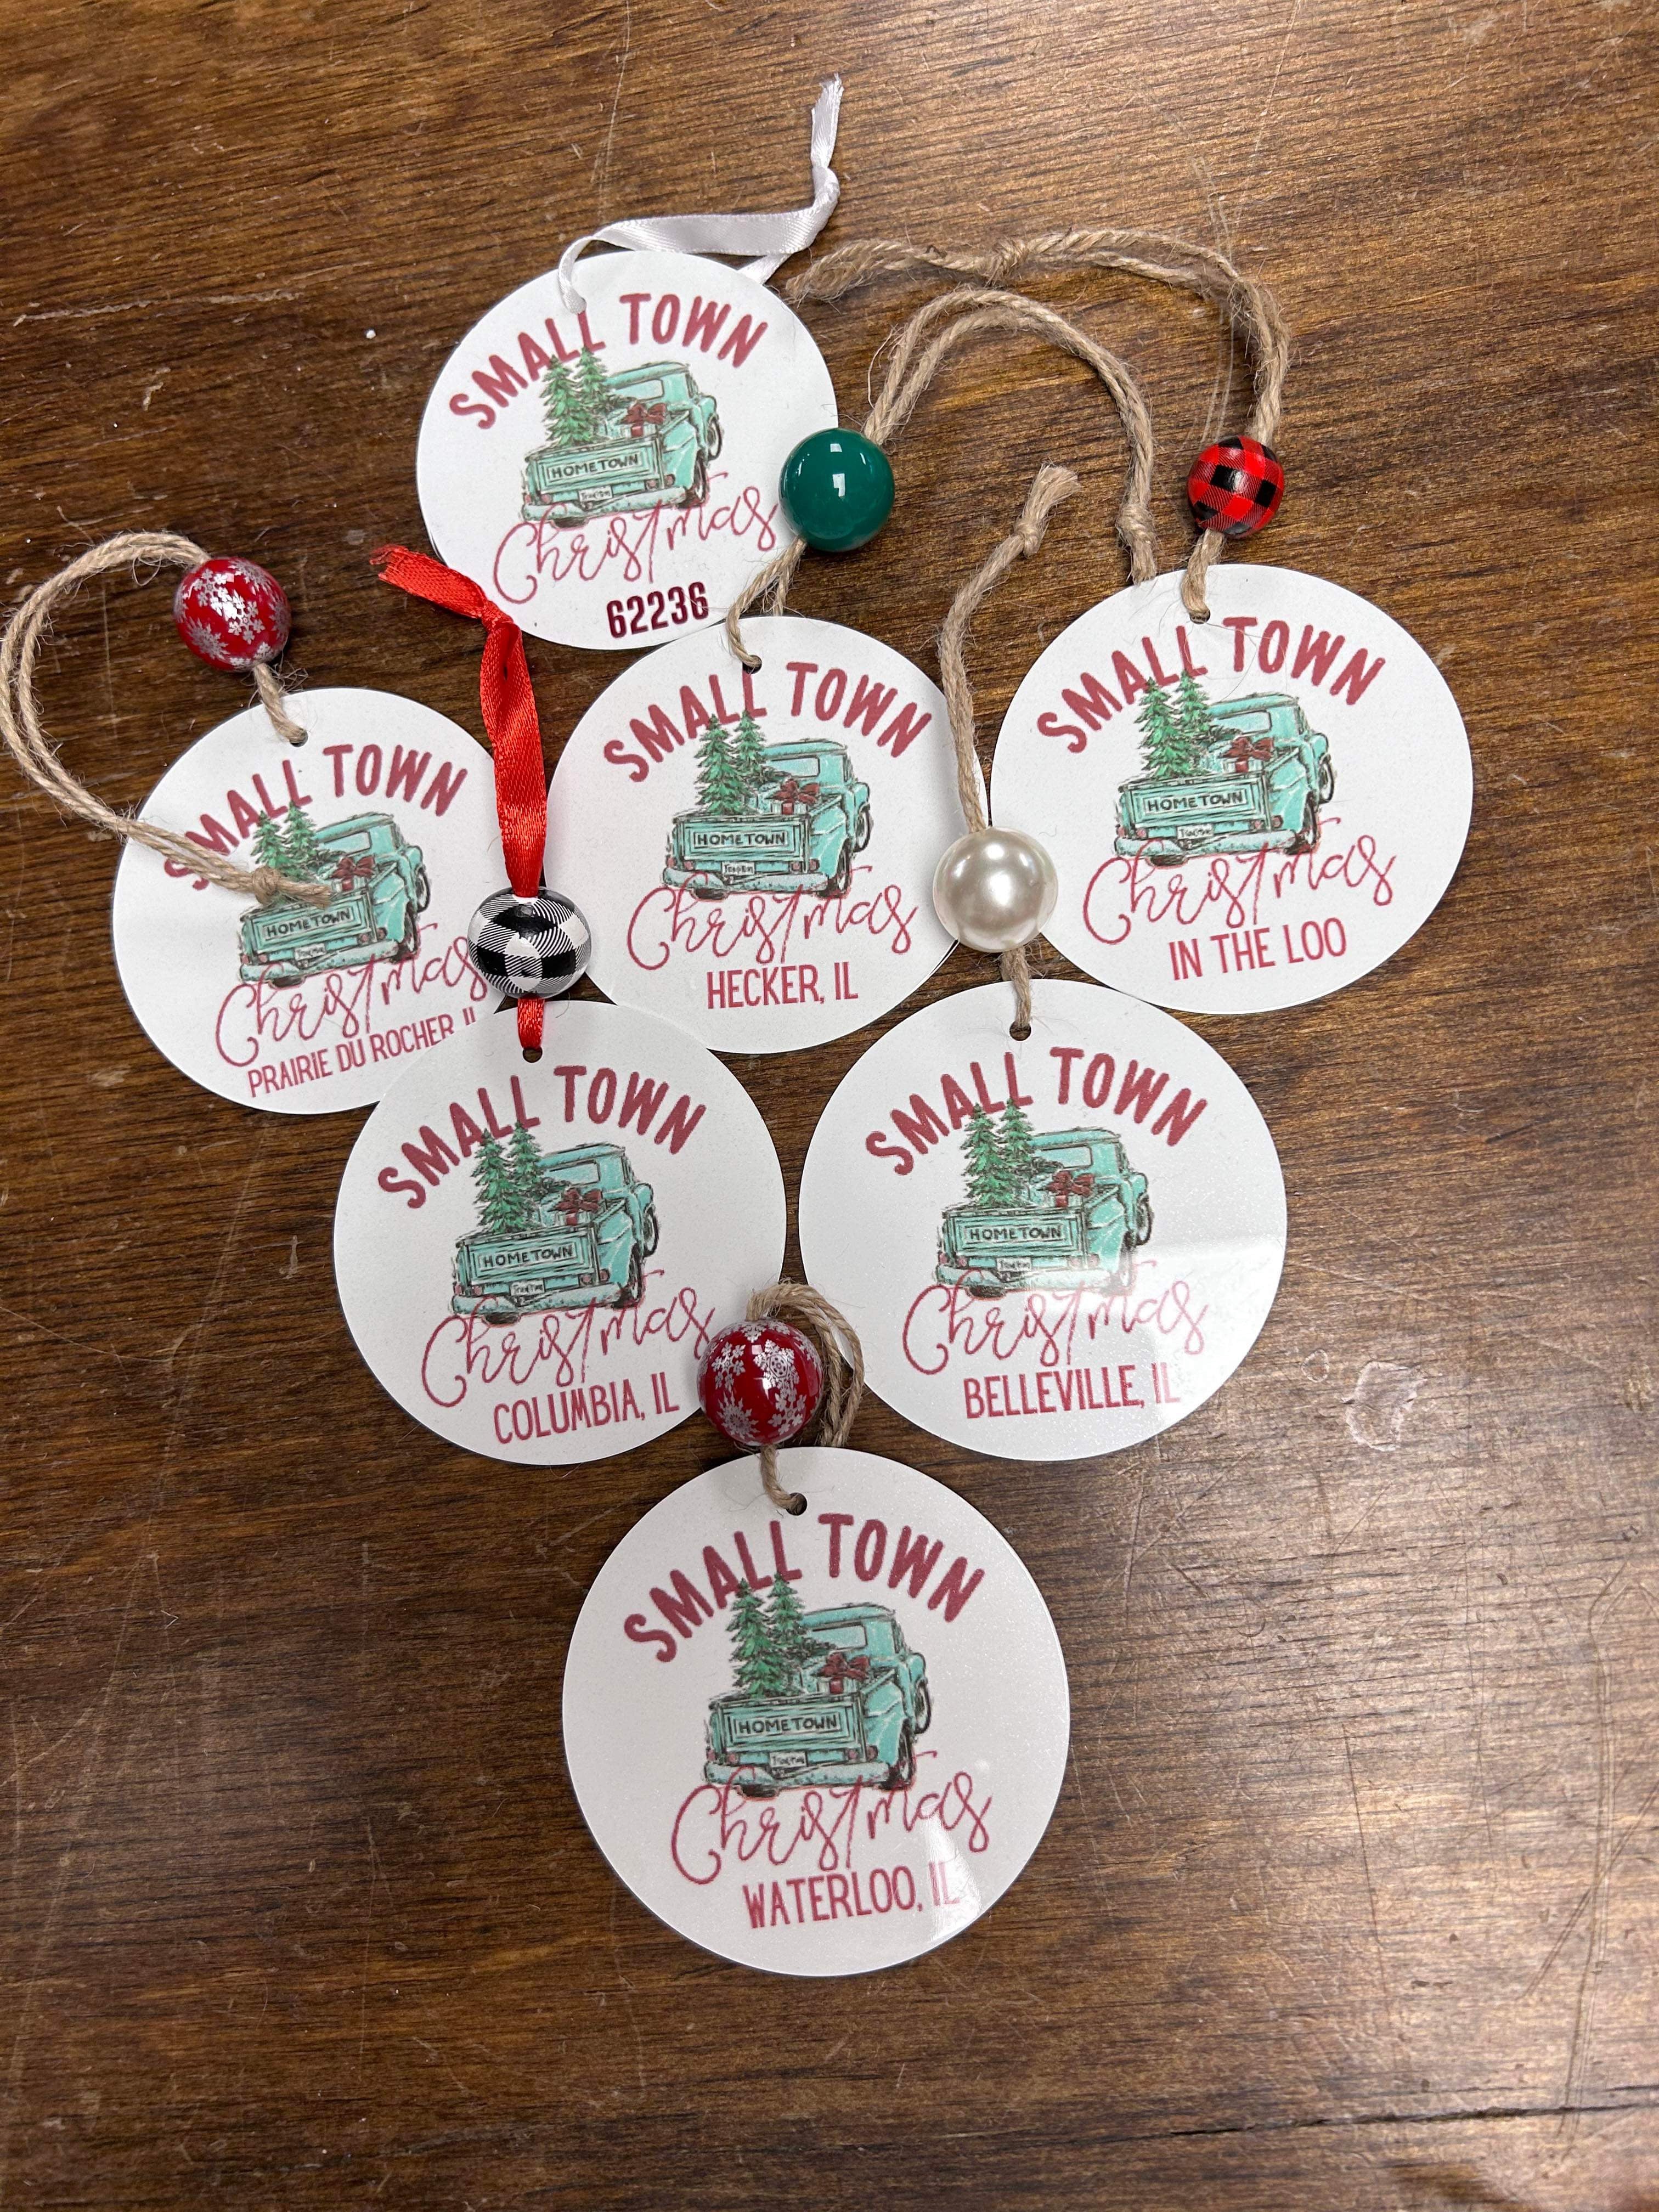 Small Town Christmas Ornament